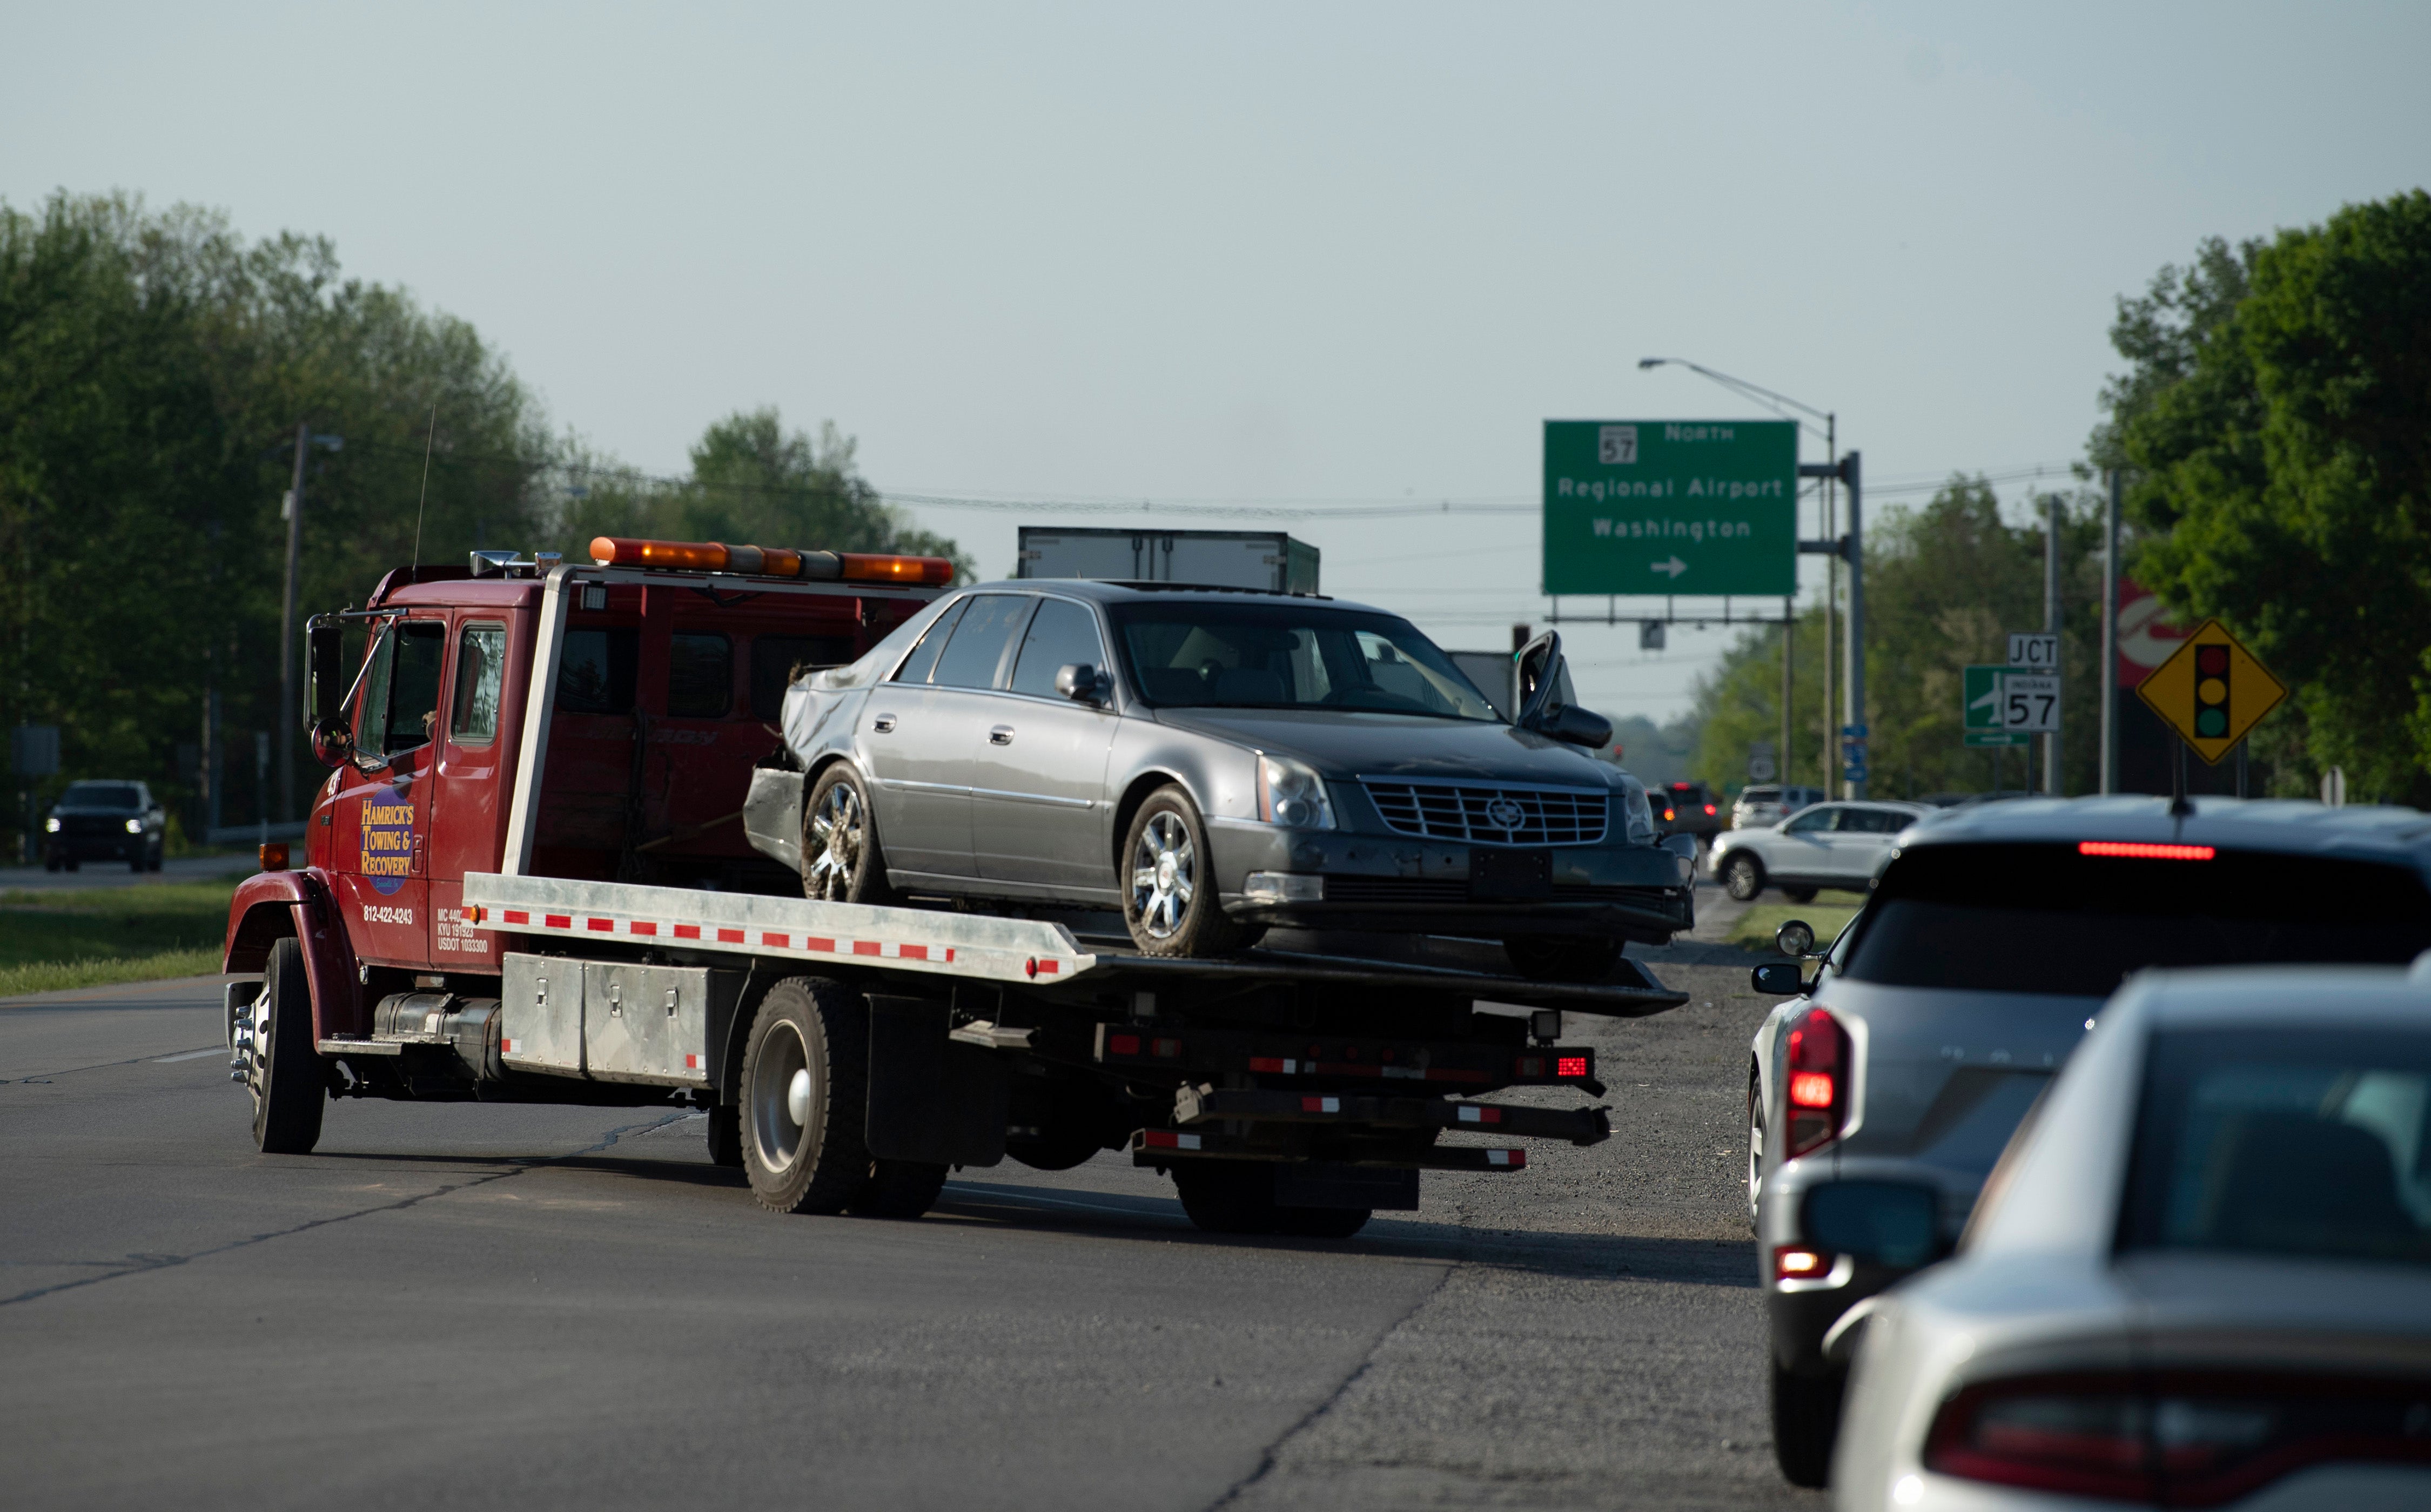 The cadillac that the fugitives were driving in is towed away on Monday